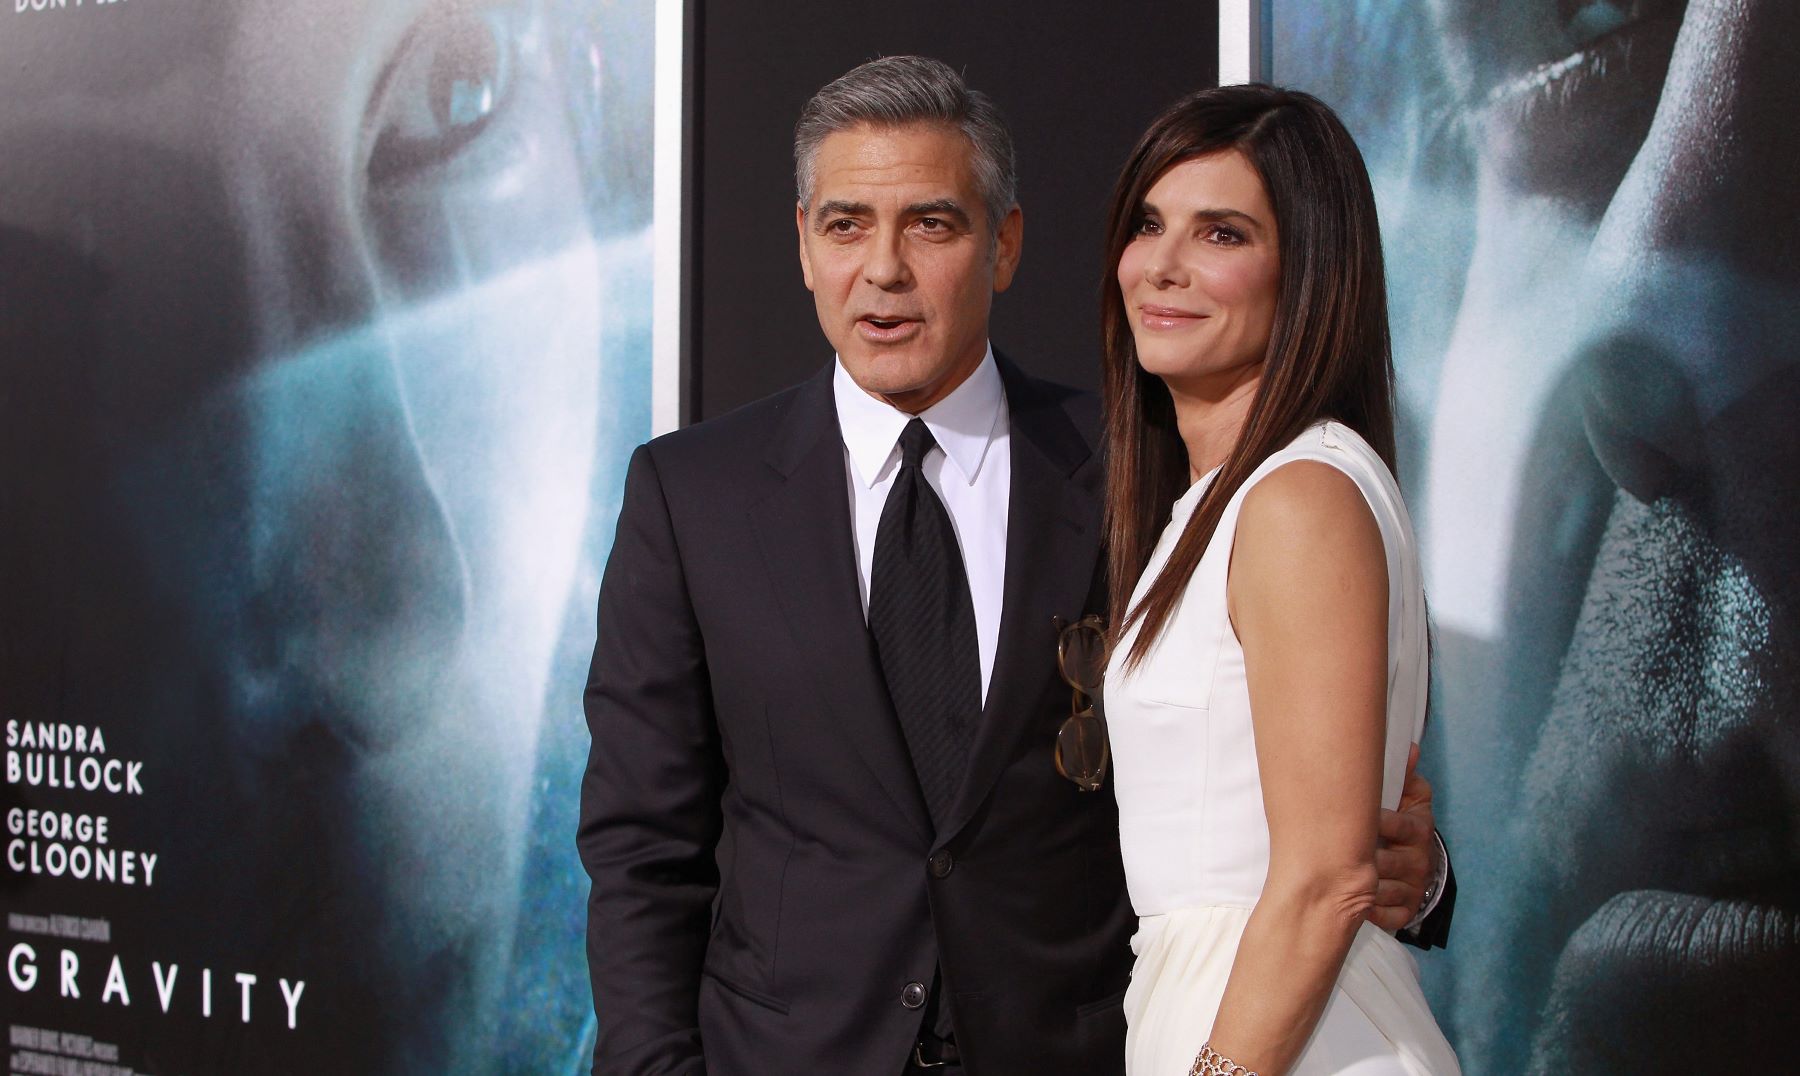 George Clooney and Sandra Bullock at the 'Gravity' New York premiere at the AMC Lincoln Square Theater